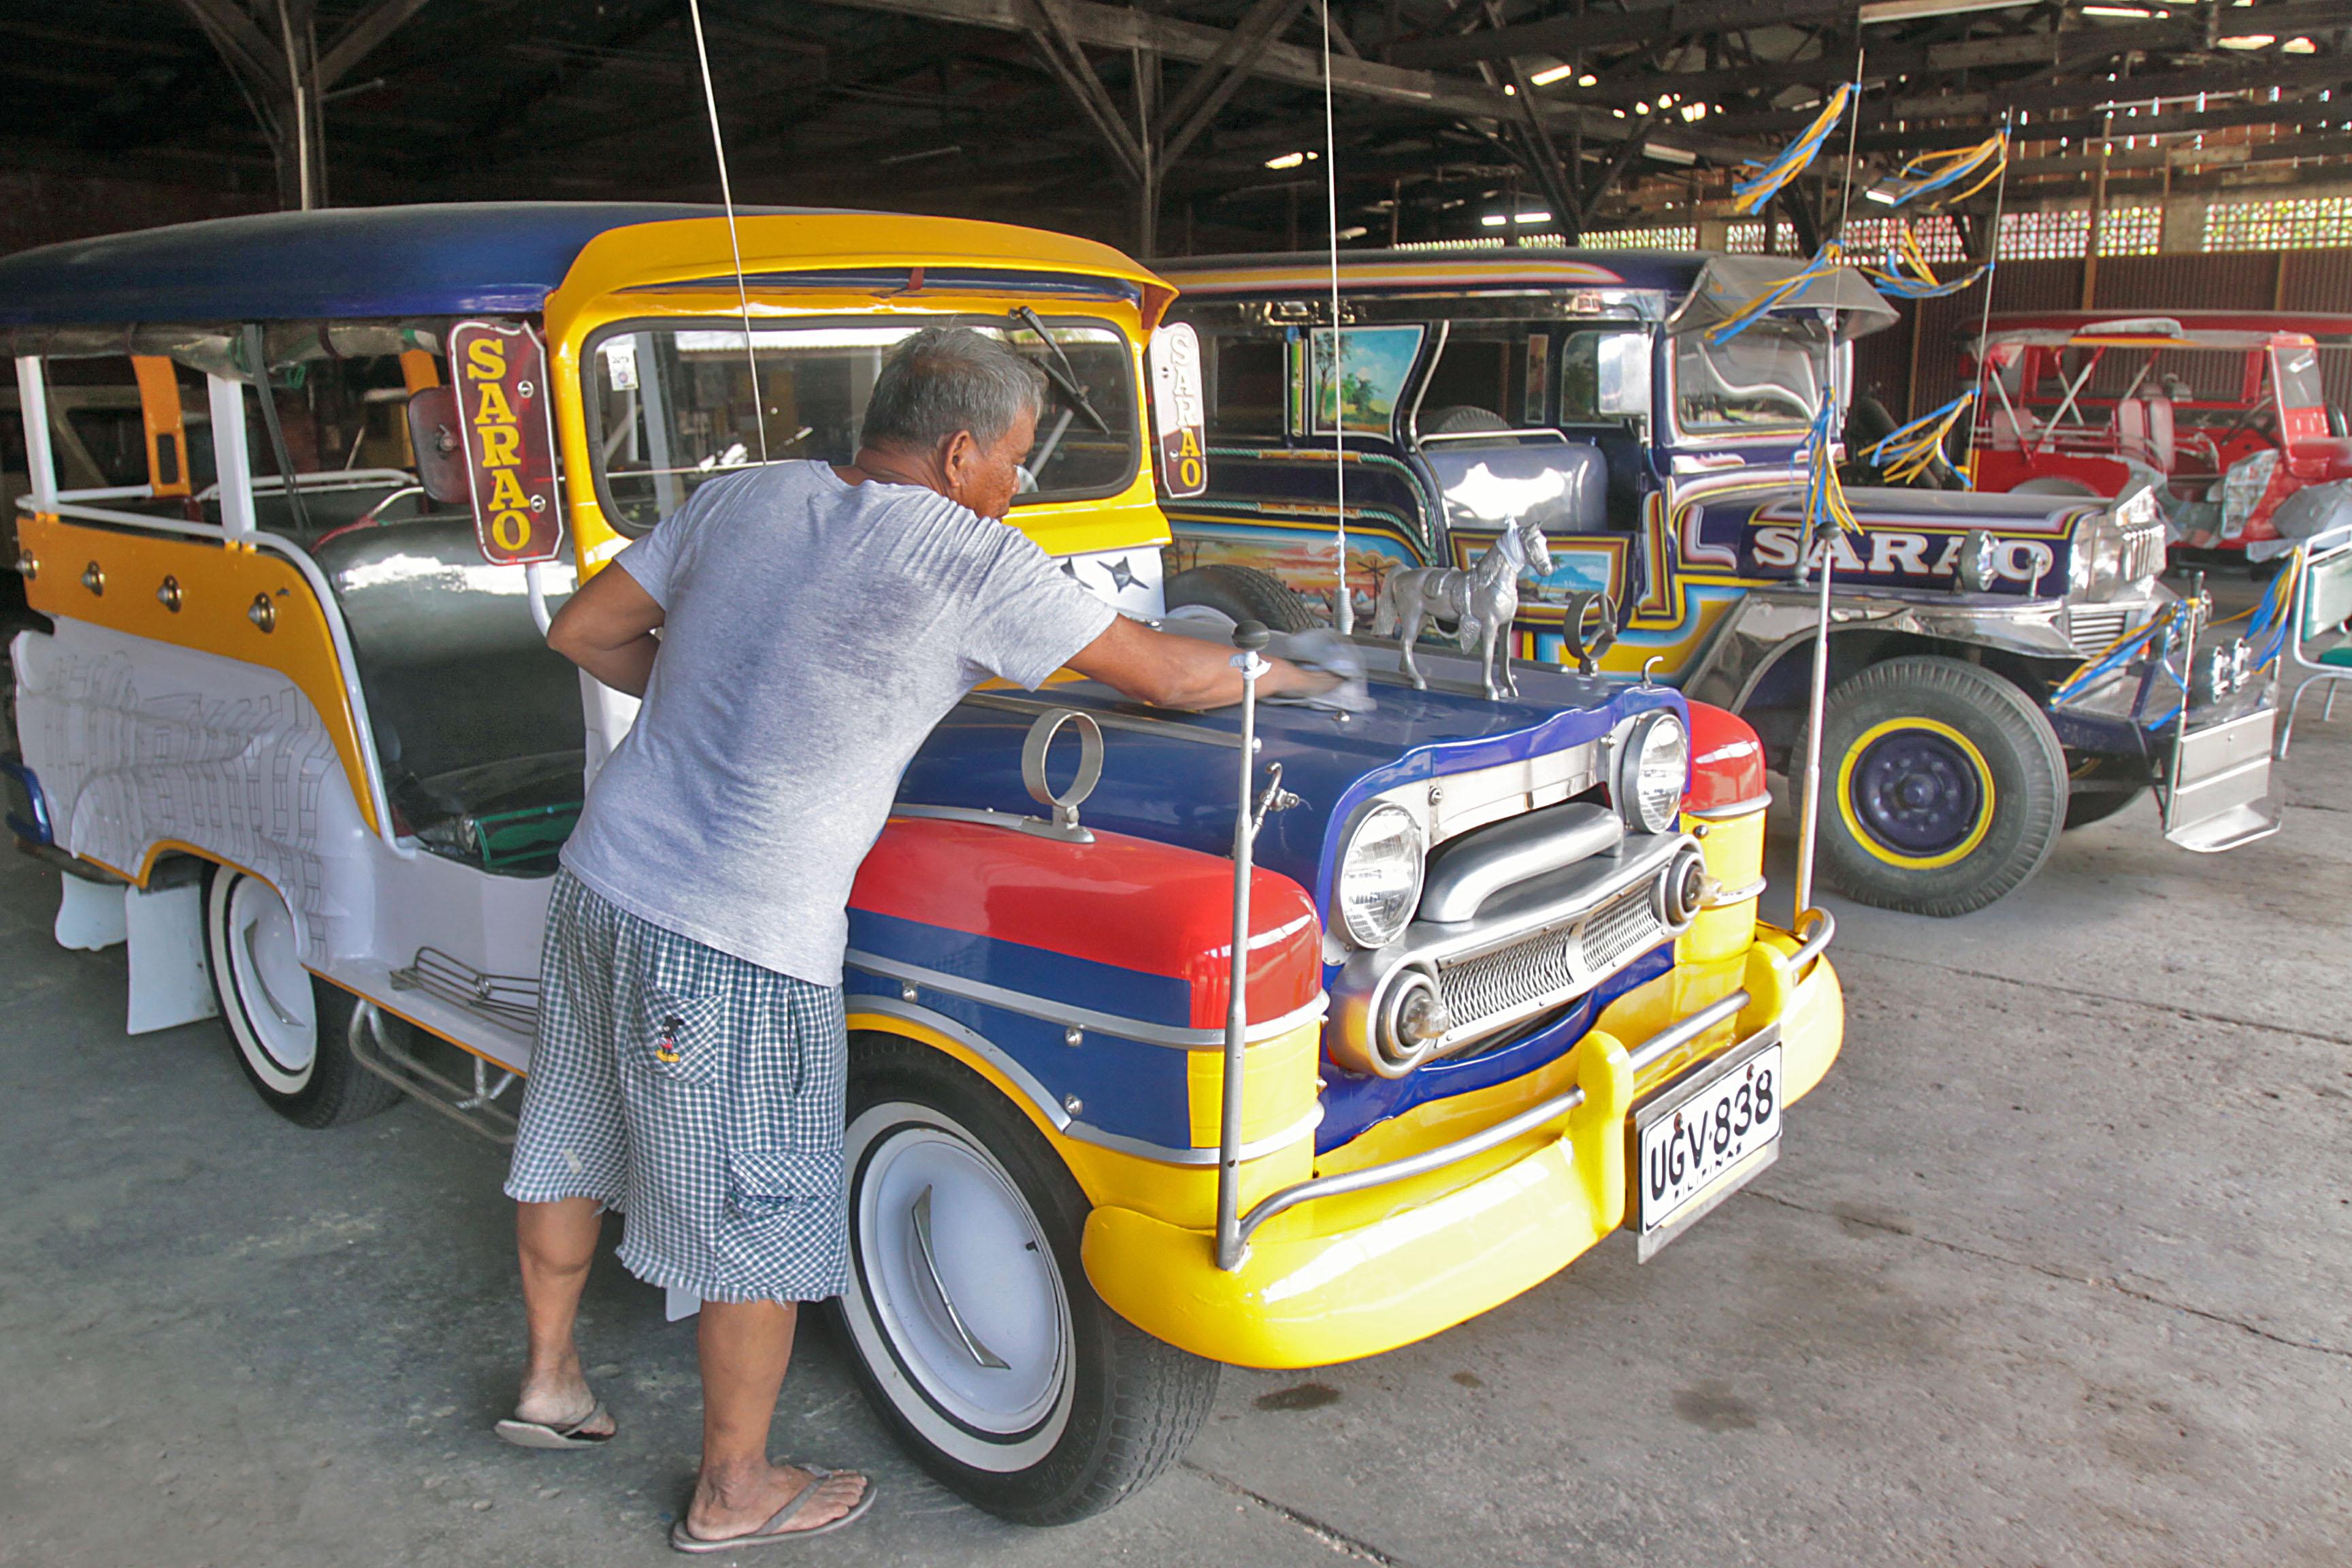 End of the road? PH jeepneys face uncertain future